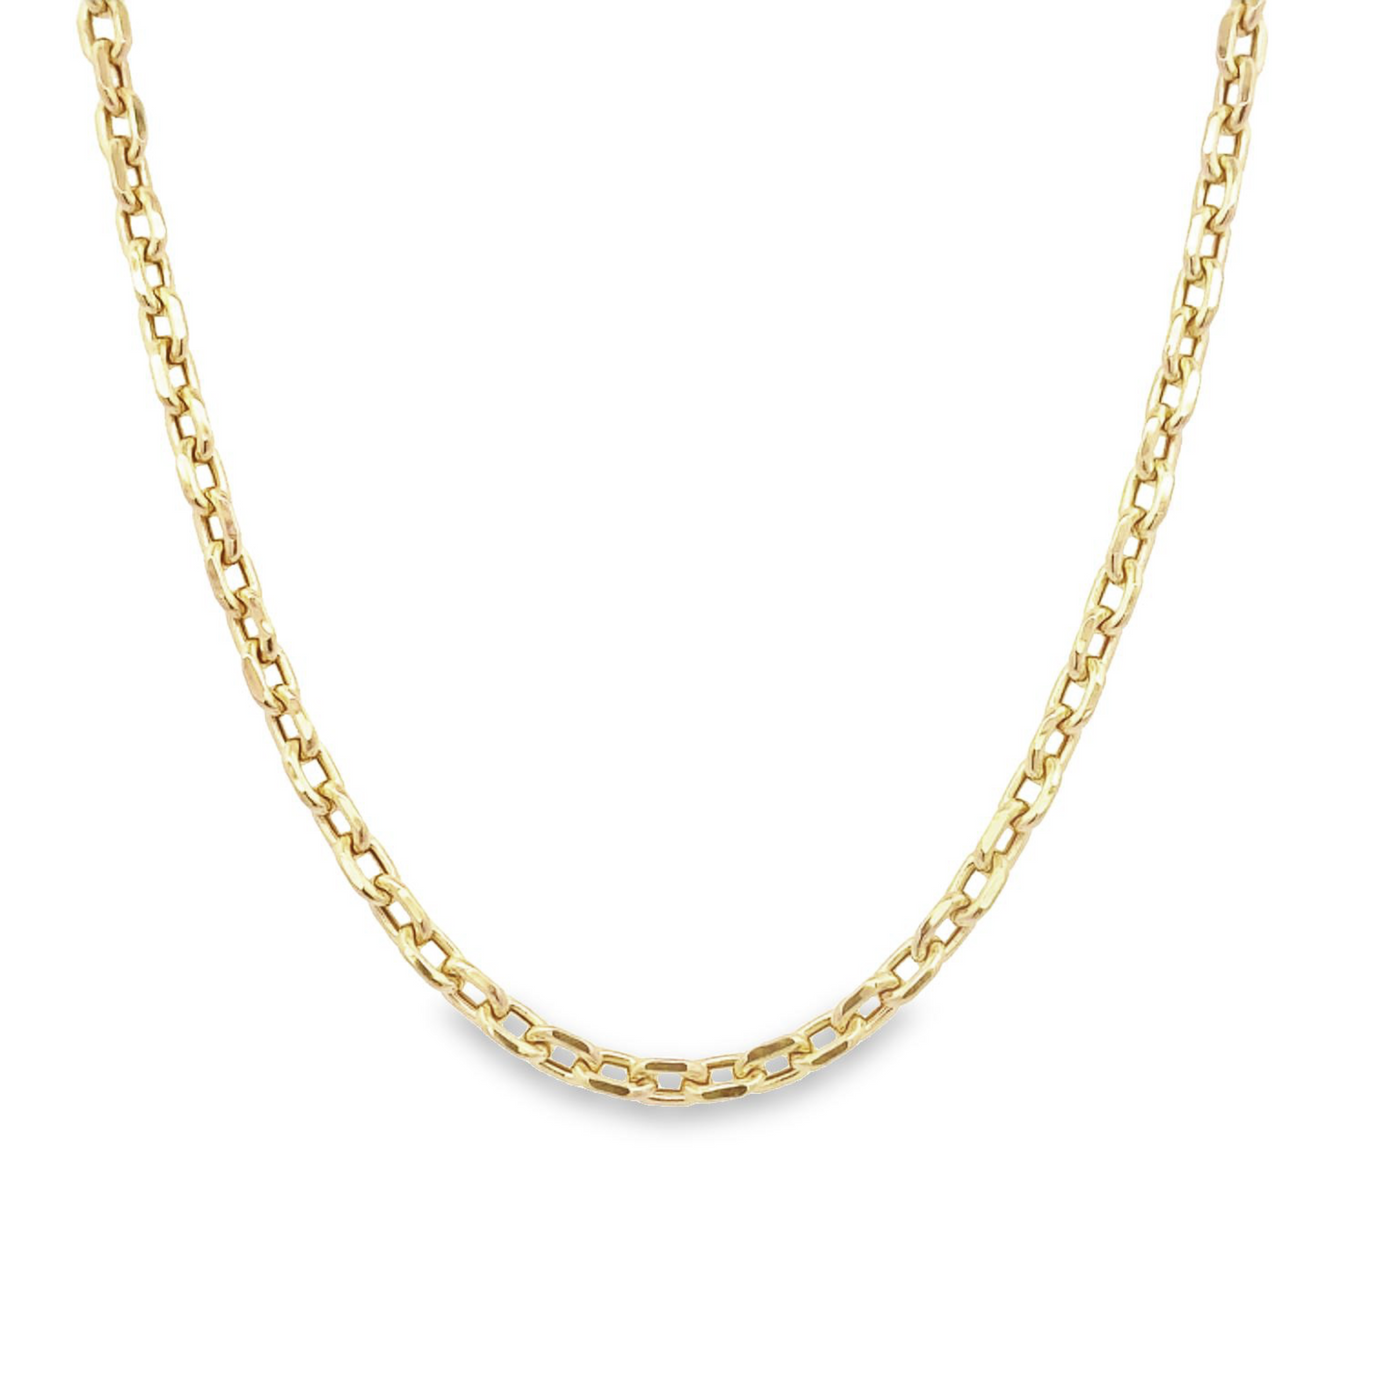 10 Karat Yellow Gold 4mm Squared Oval Link Chain